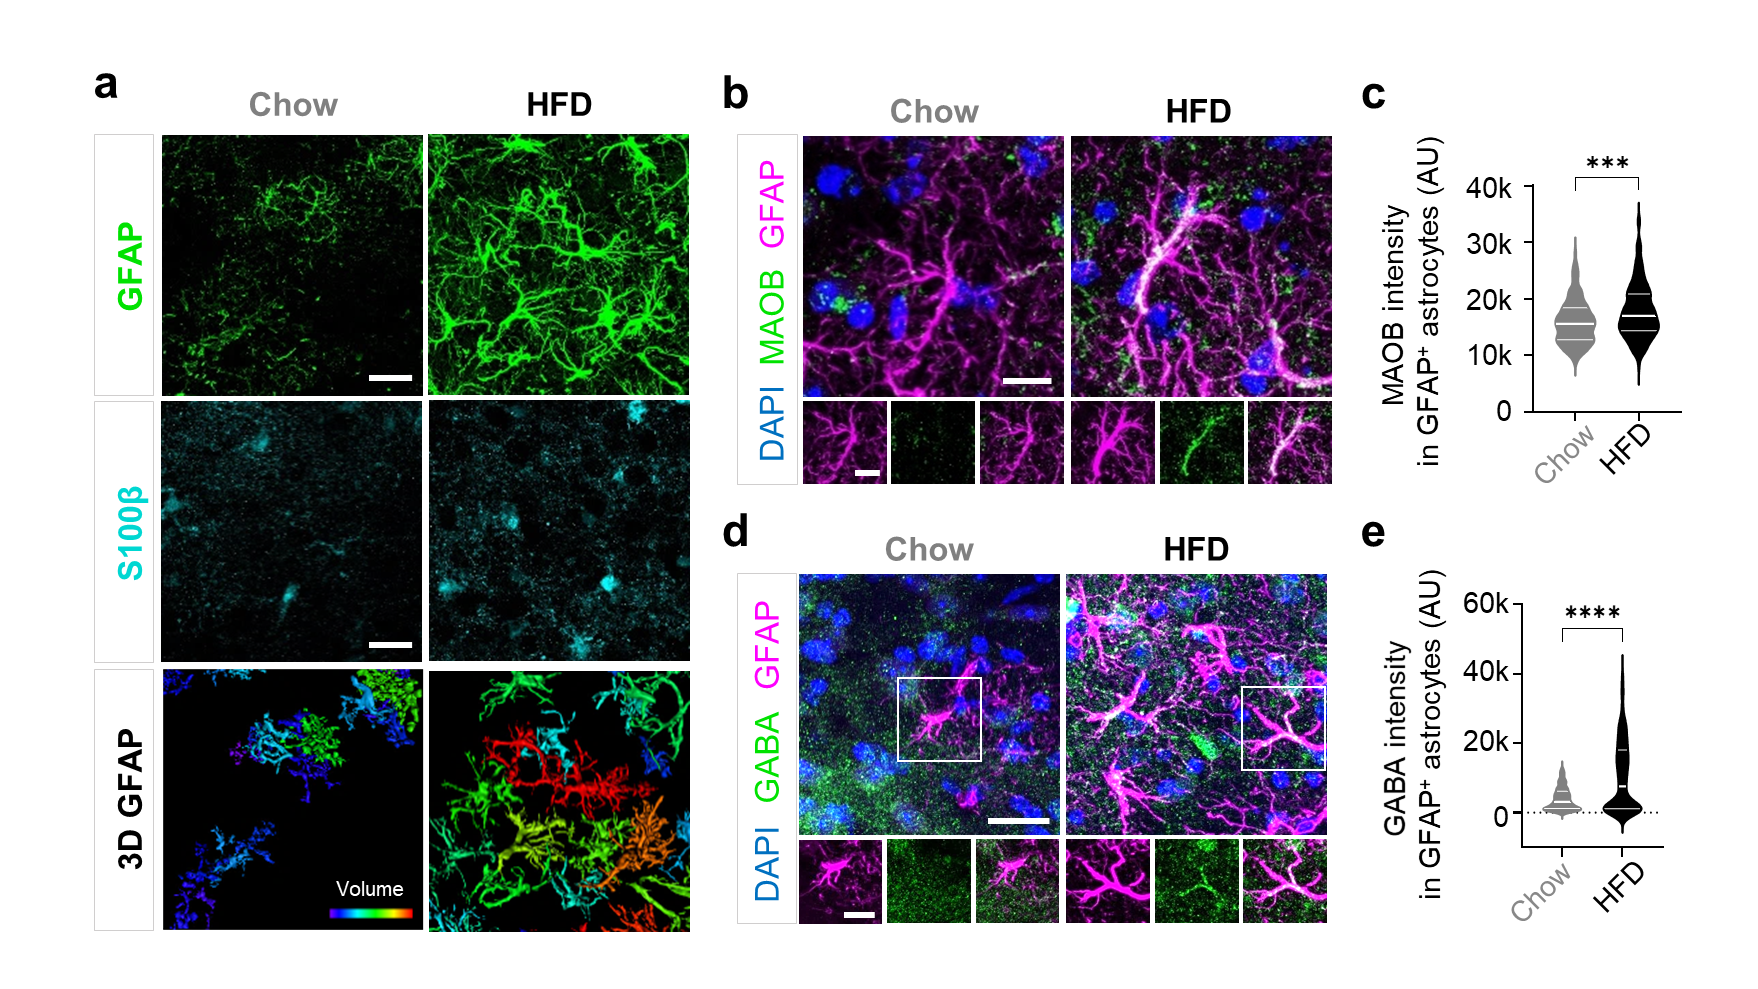 Figure 3. Astrocytes in LHA show hypertrophy in response to a high-fat diet. After consumption of a high-fat diet, molecular markers of astrocytes increase. Following the intake of a high-fat diet, the number and volume of astrocytes increase, leading to reactive astrogliosis. Subsequently, the expression of MAOB and GABA levels in astrocytes increases.